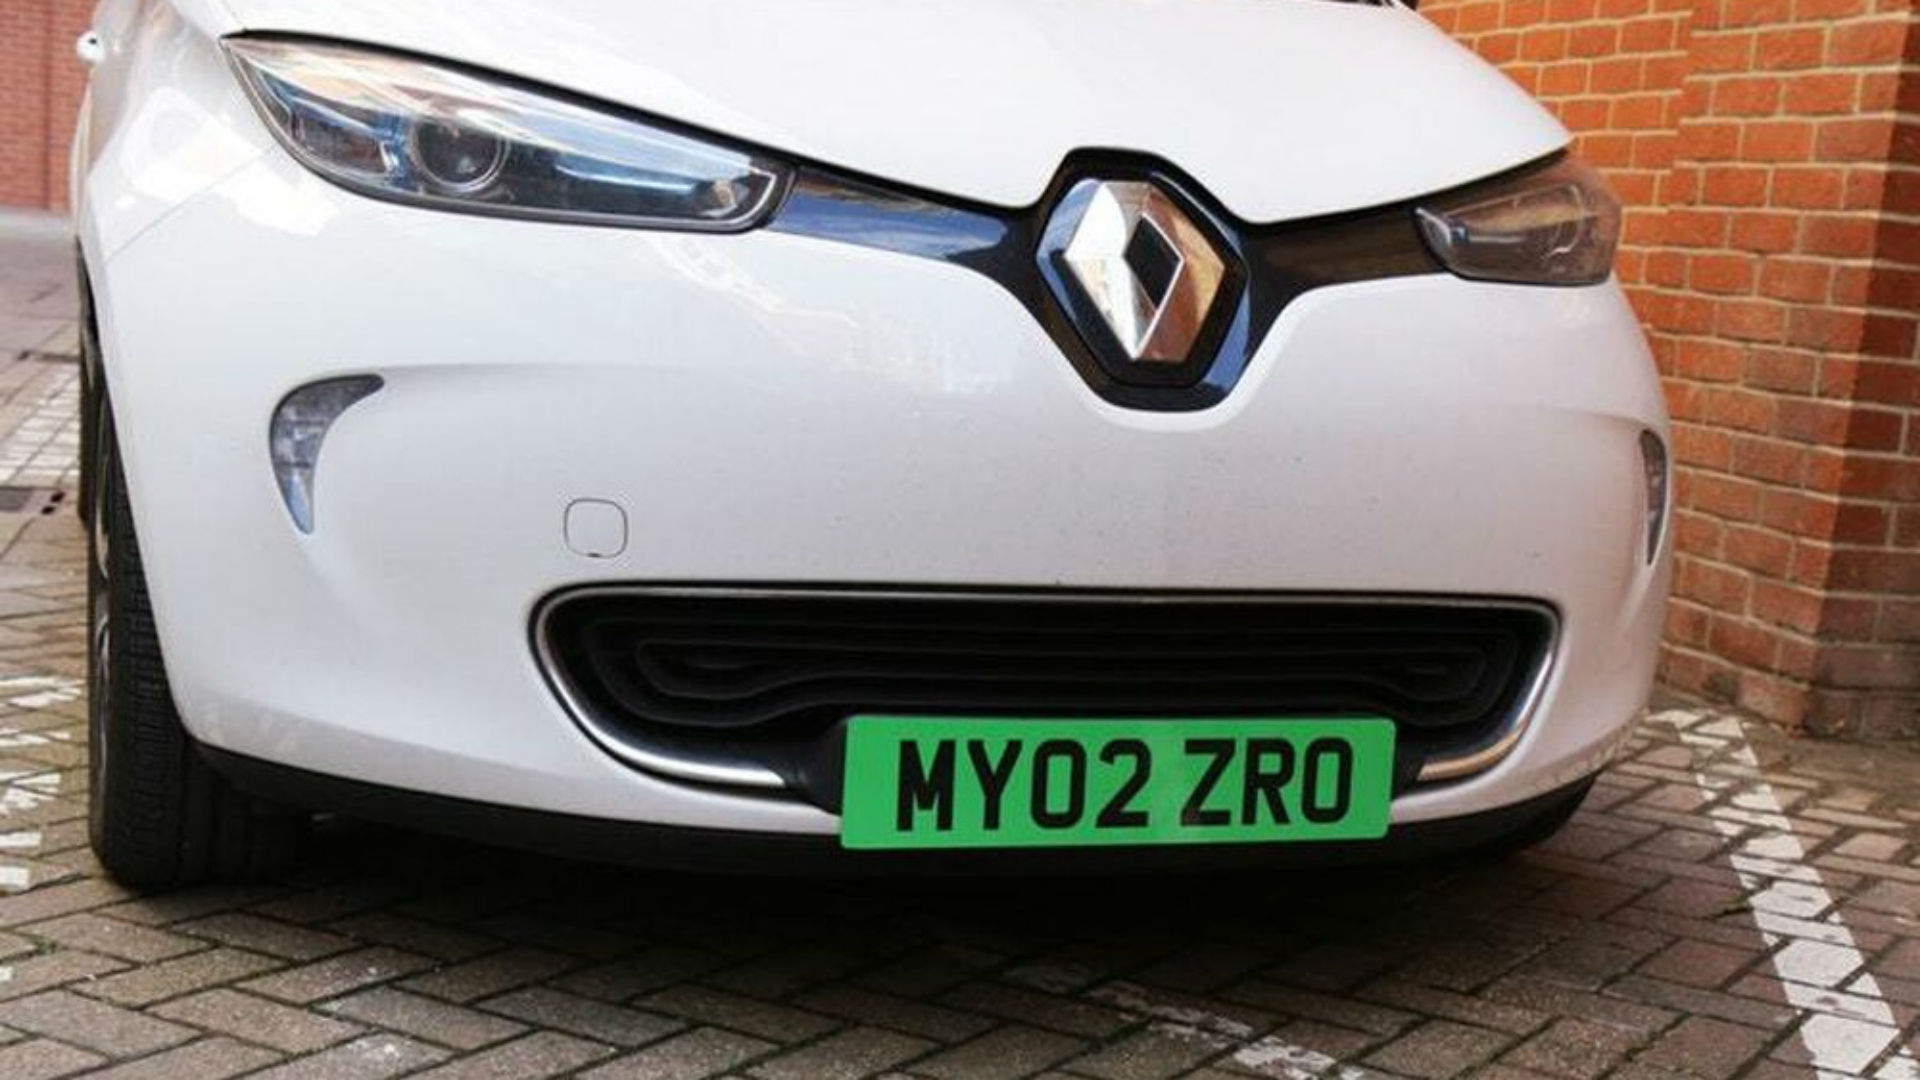 Green number plate on electric car